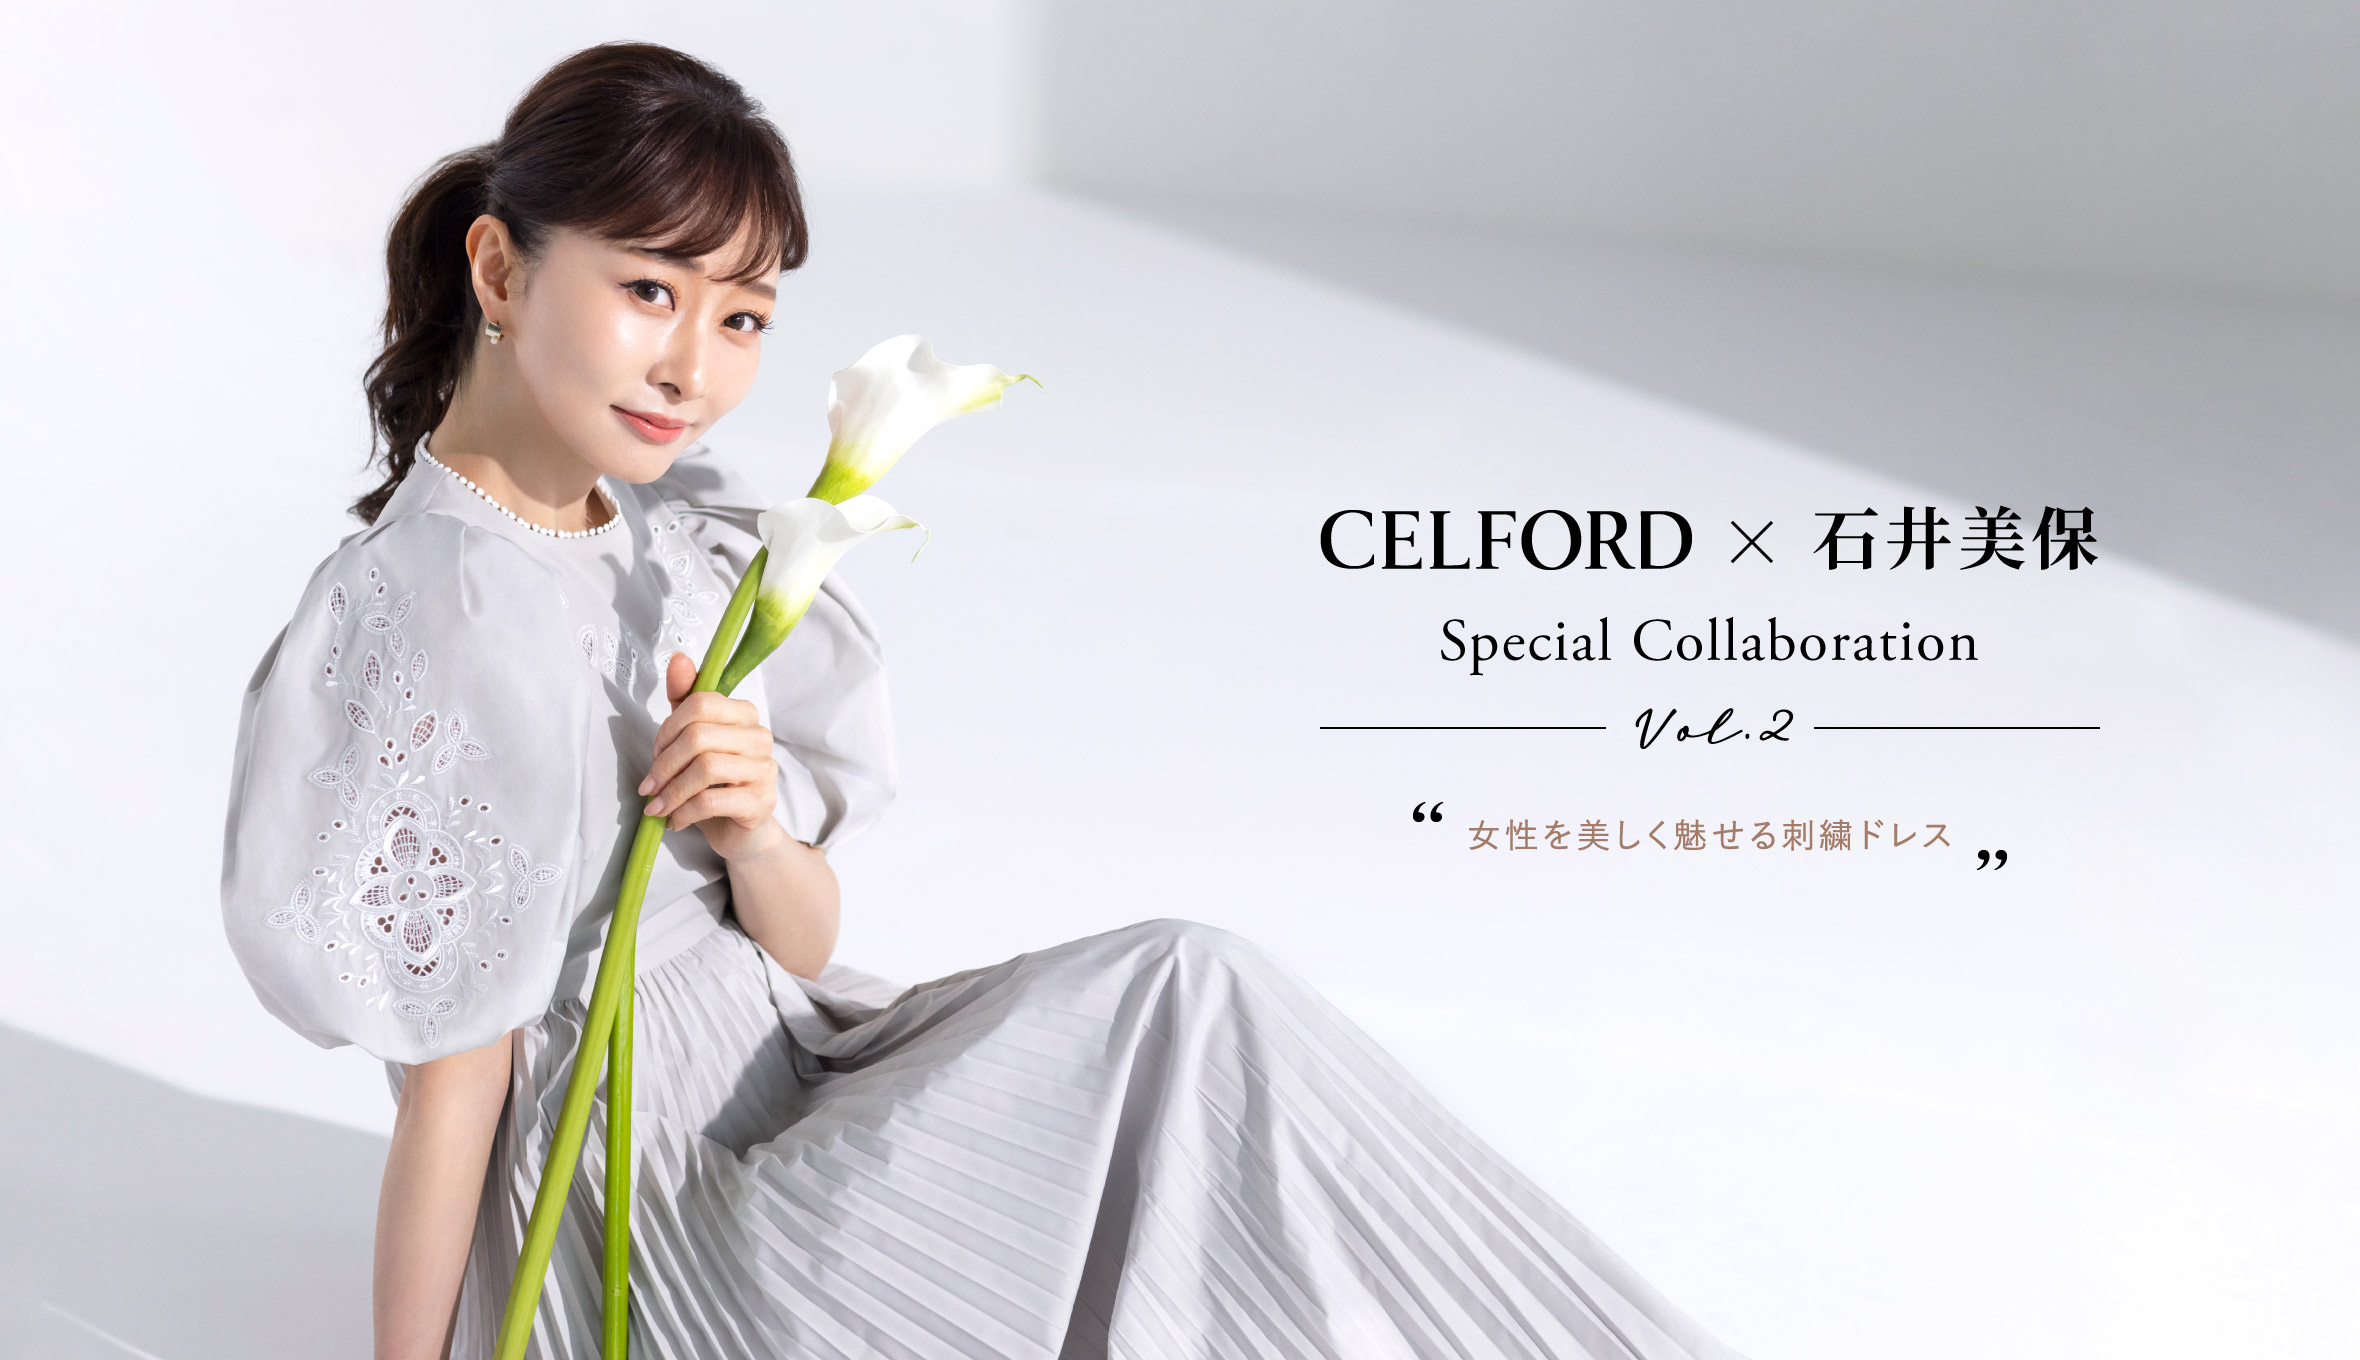 CELFORD × 石井美保　Special Collaboration ver.2　女性を美しく見せる刺繍ドレス